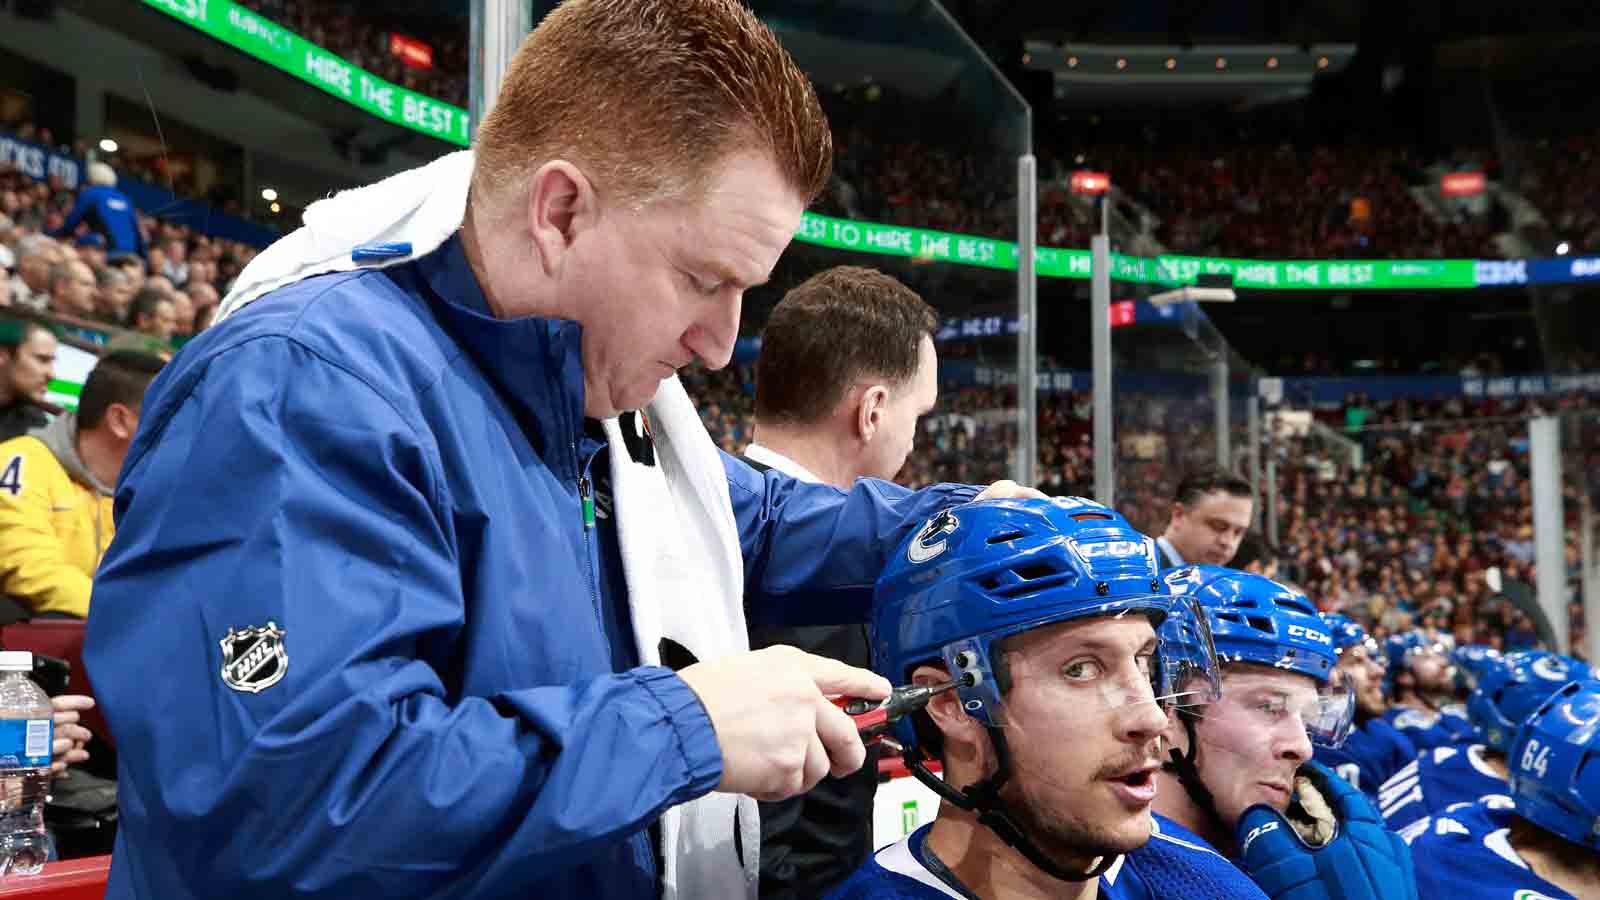 Vancouver Canucks' Staffer Uses Social Media to Find Fan Who Saved His Life